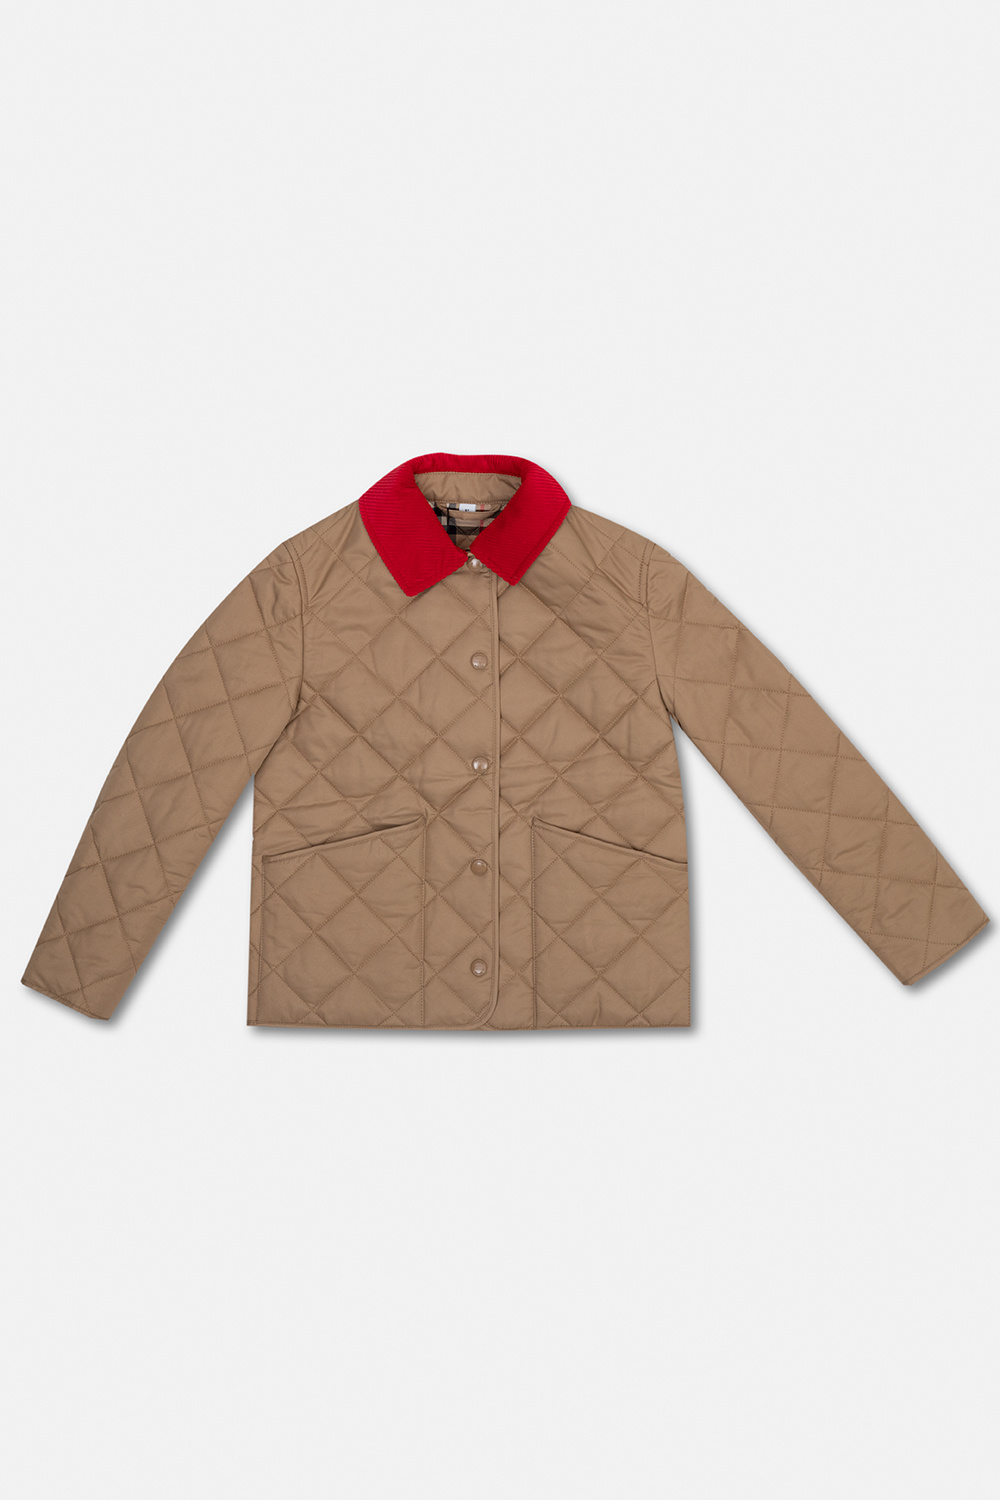 Burberry Kids ‘Daley’ quilted jacket